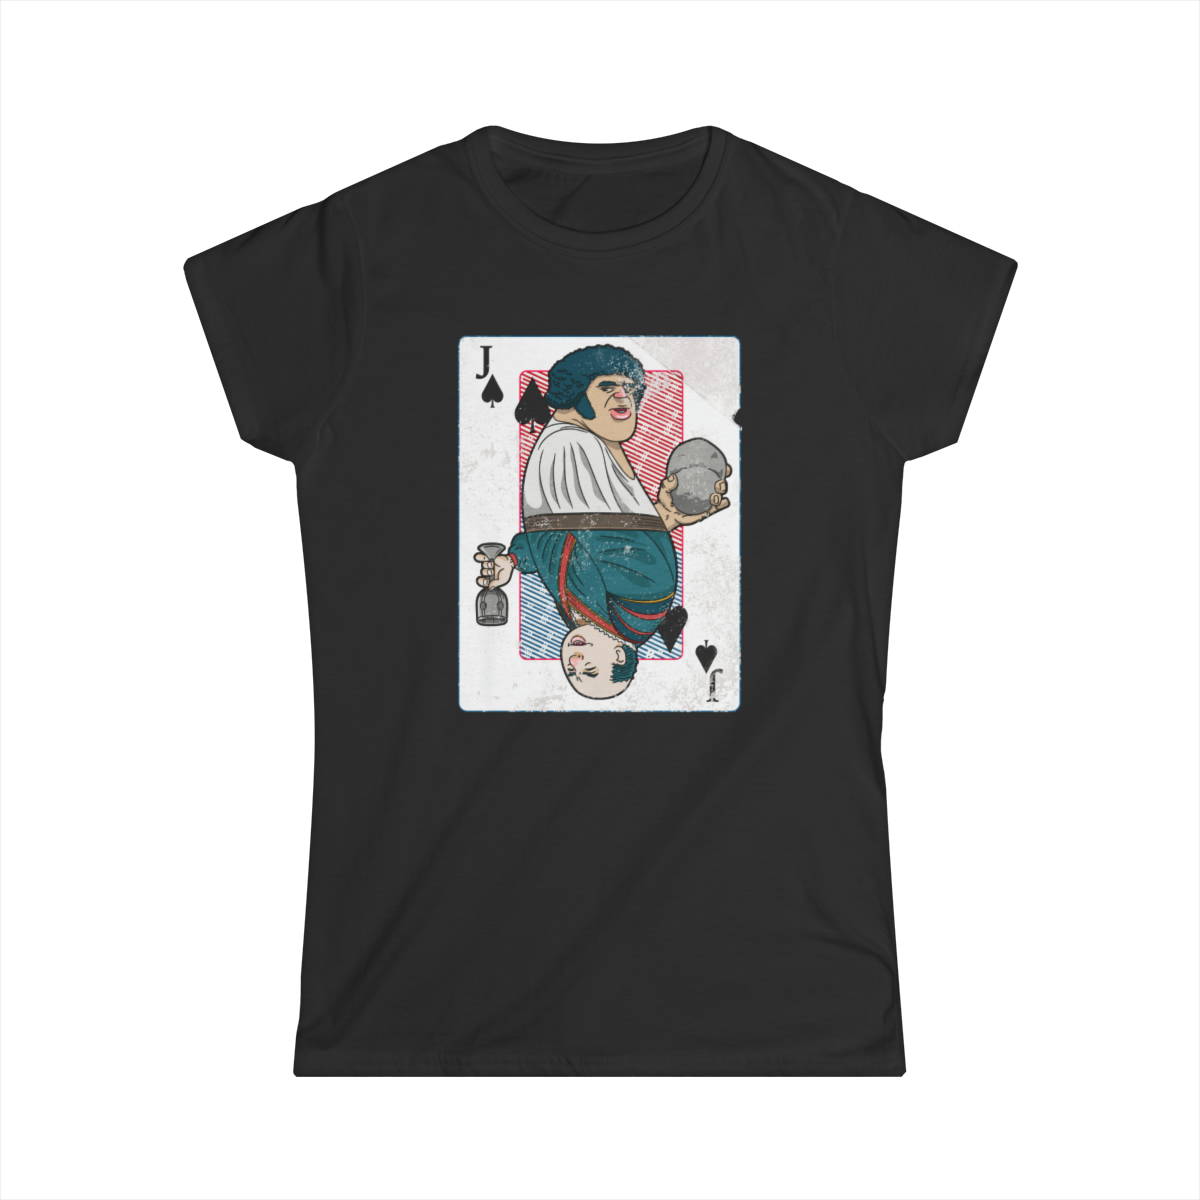 Jack of Spades - Women's Softstyle Tee